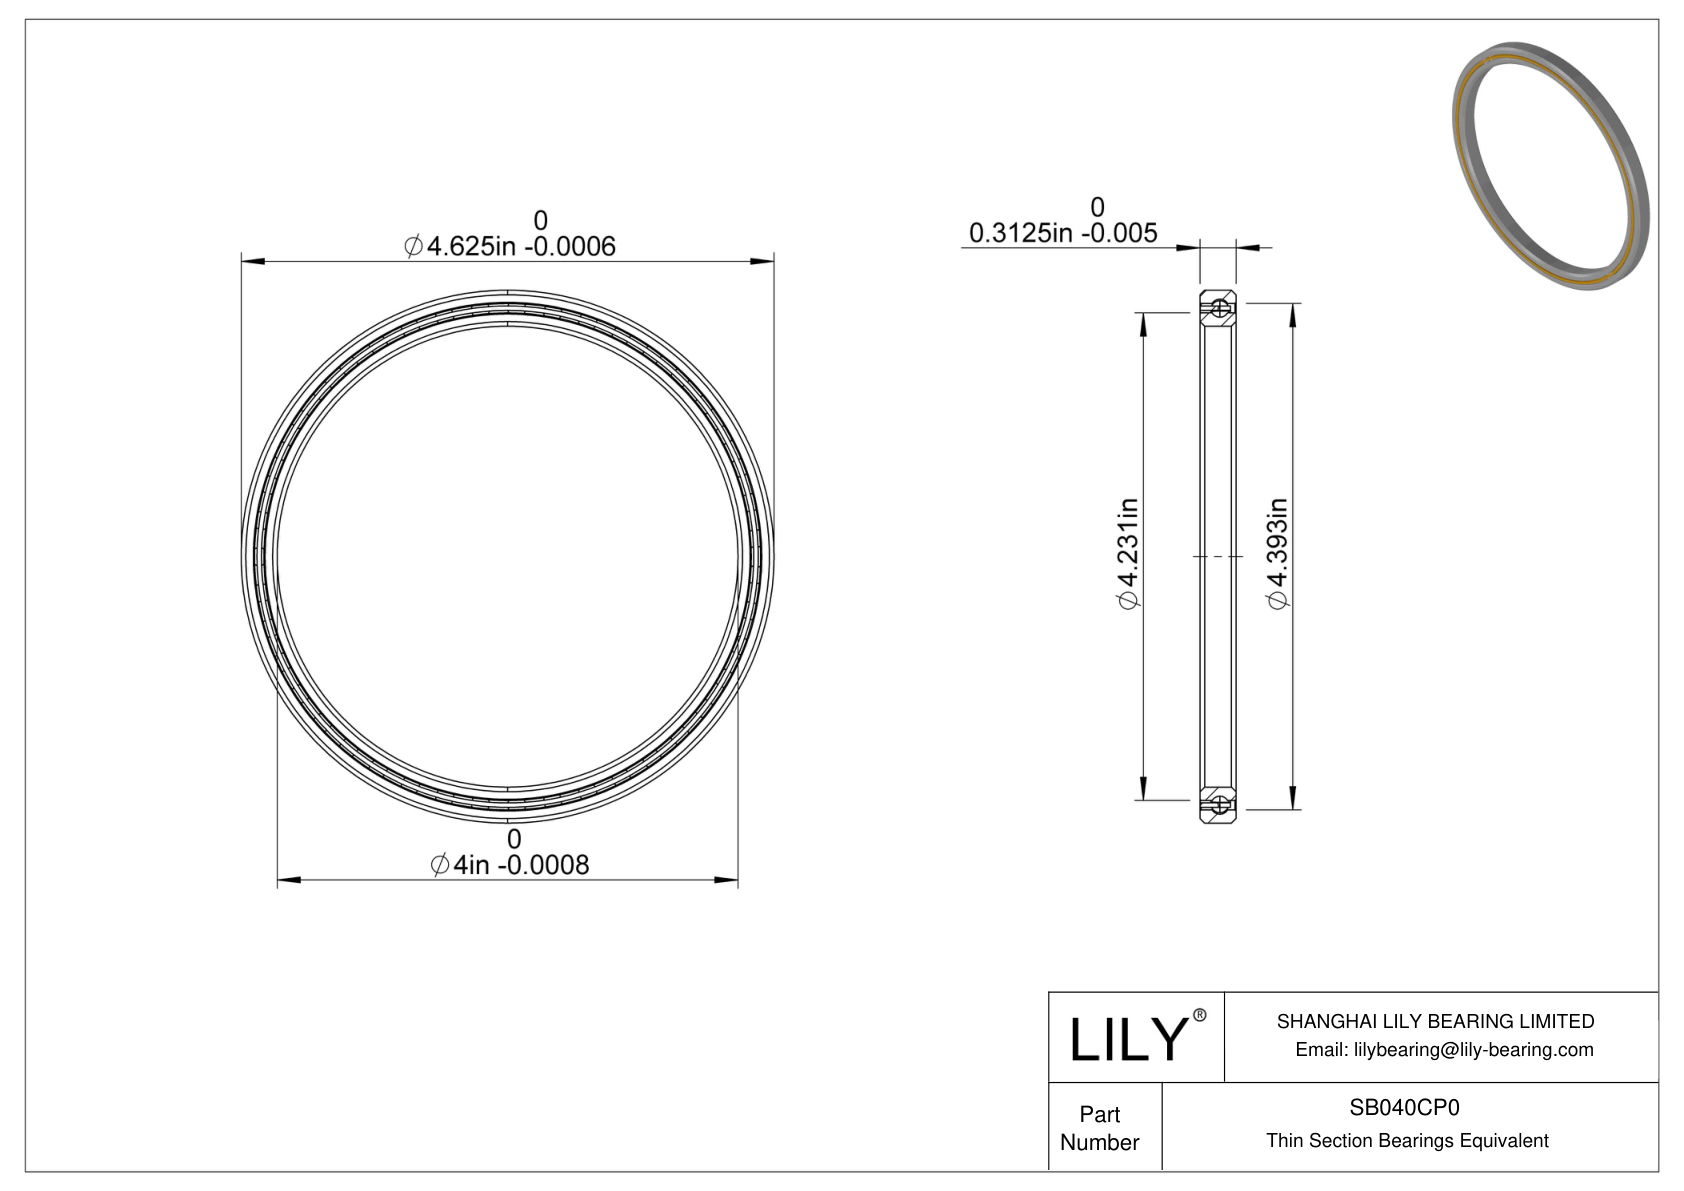 SB040CP0 Constant Section (CS) Bearings cad drawing